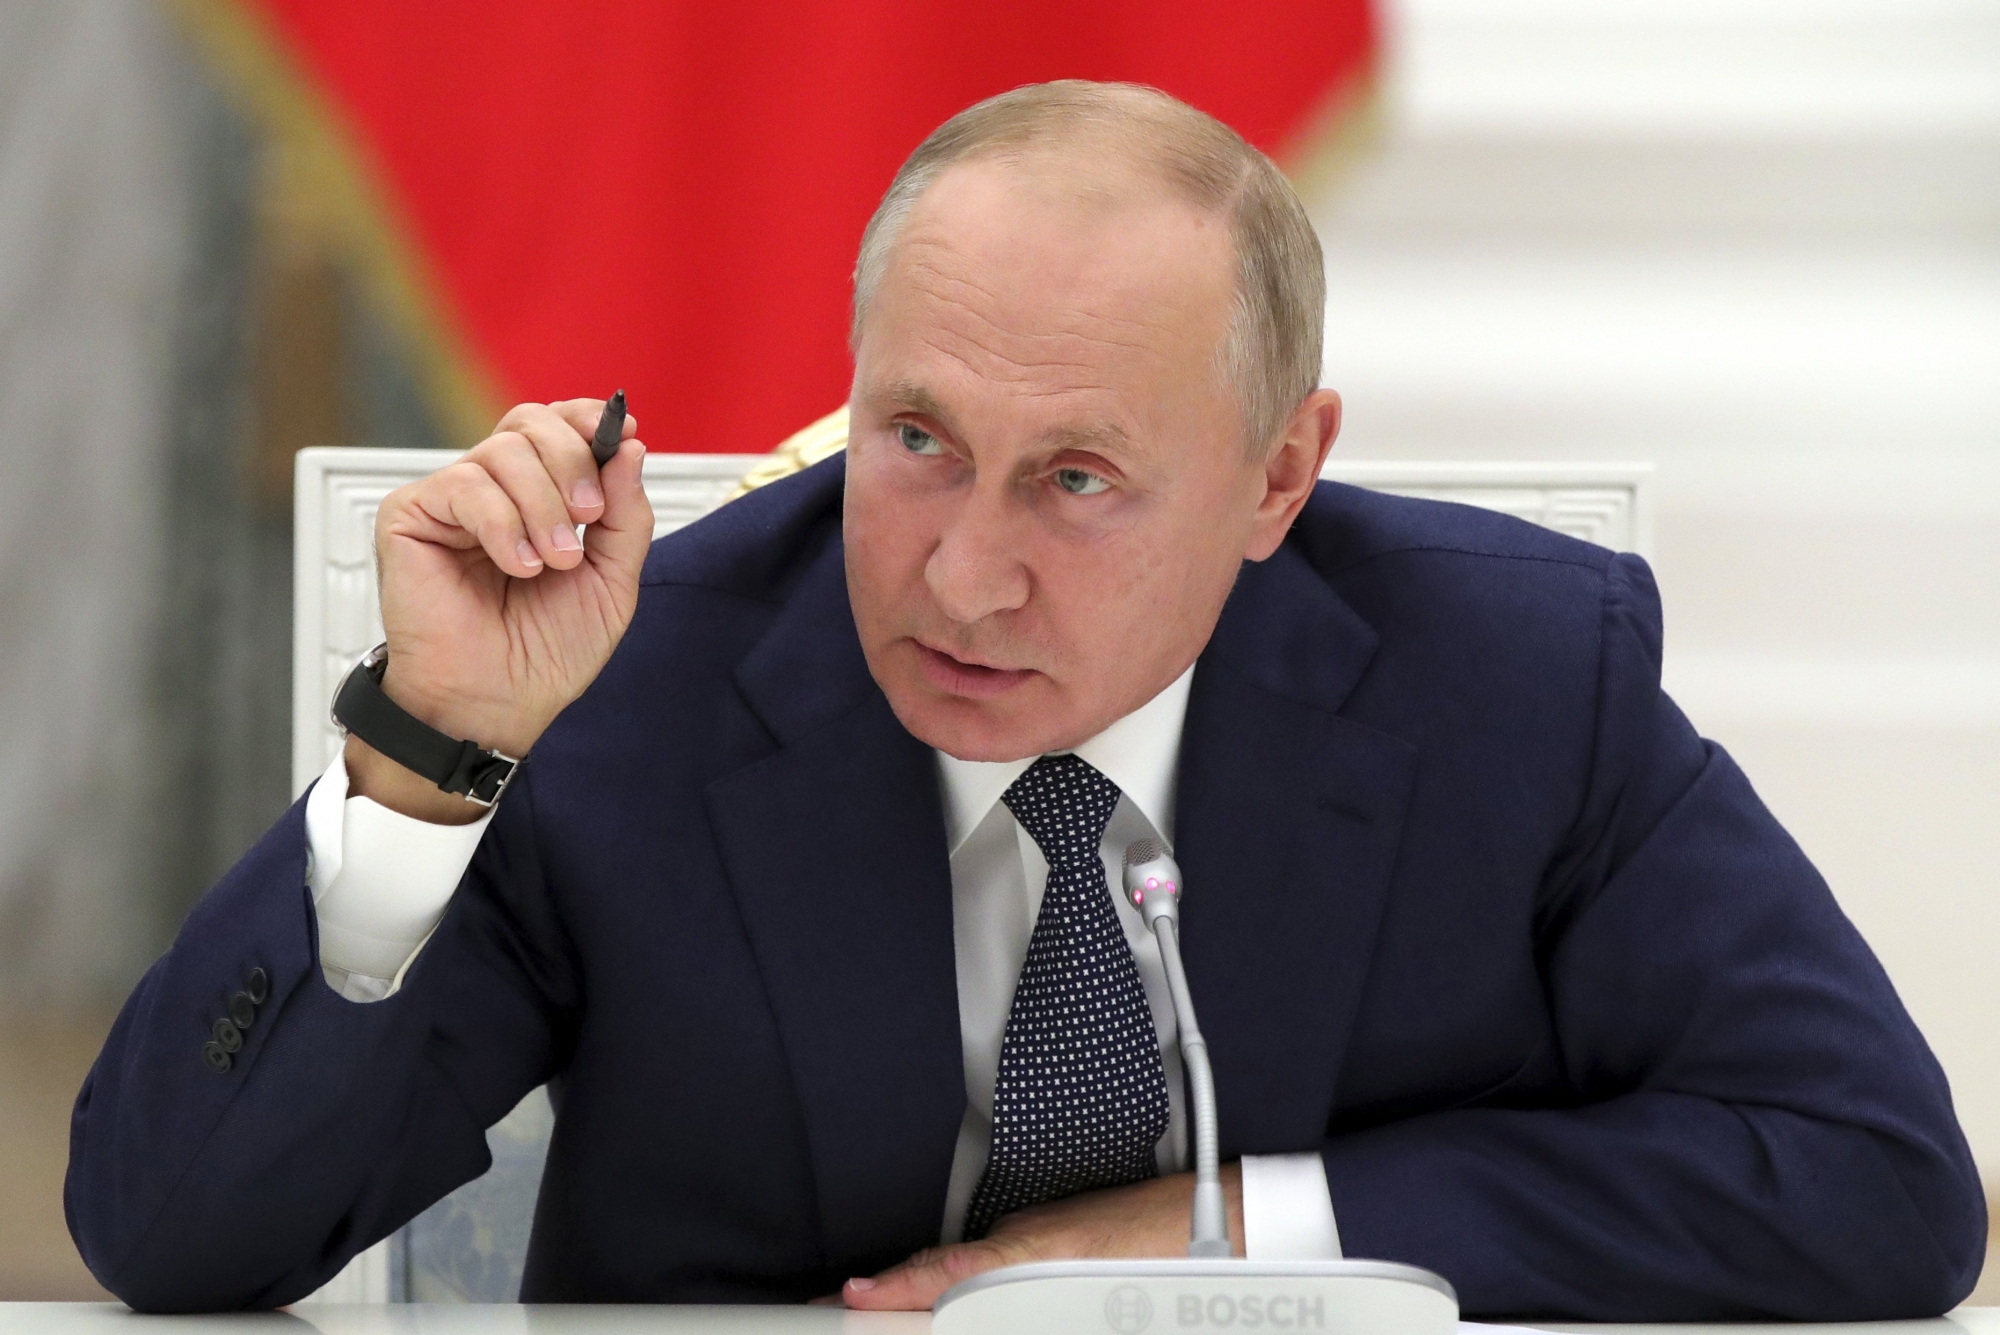 Russian President Vladimir Putin gestures while speaking during a meeting with employees of the nuclear industry on their professional holiday, Nuclear Industry Worker's Day, at the Kremlin in Moscow, Russia, Wednesday, Sept. 23, 2020. (Mikhail Metzel, Sputnik, Kremlin Pool Photo via AP) ArcInfo